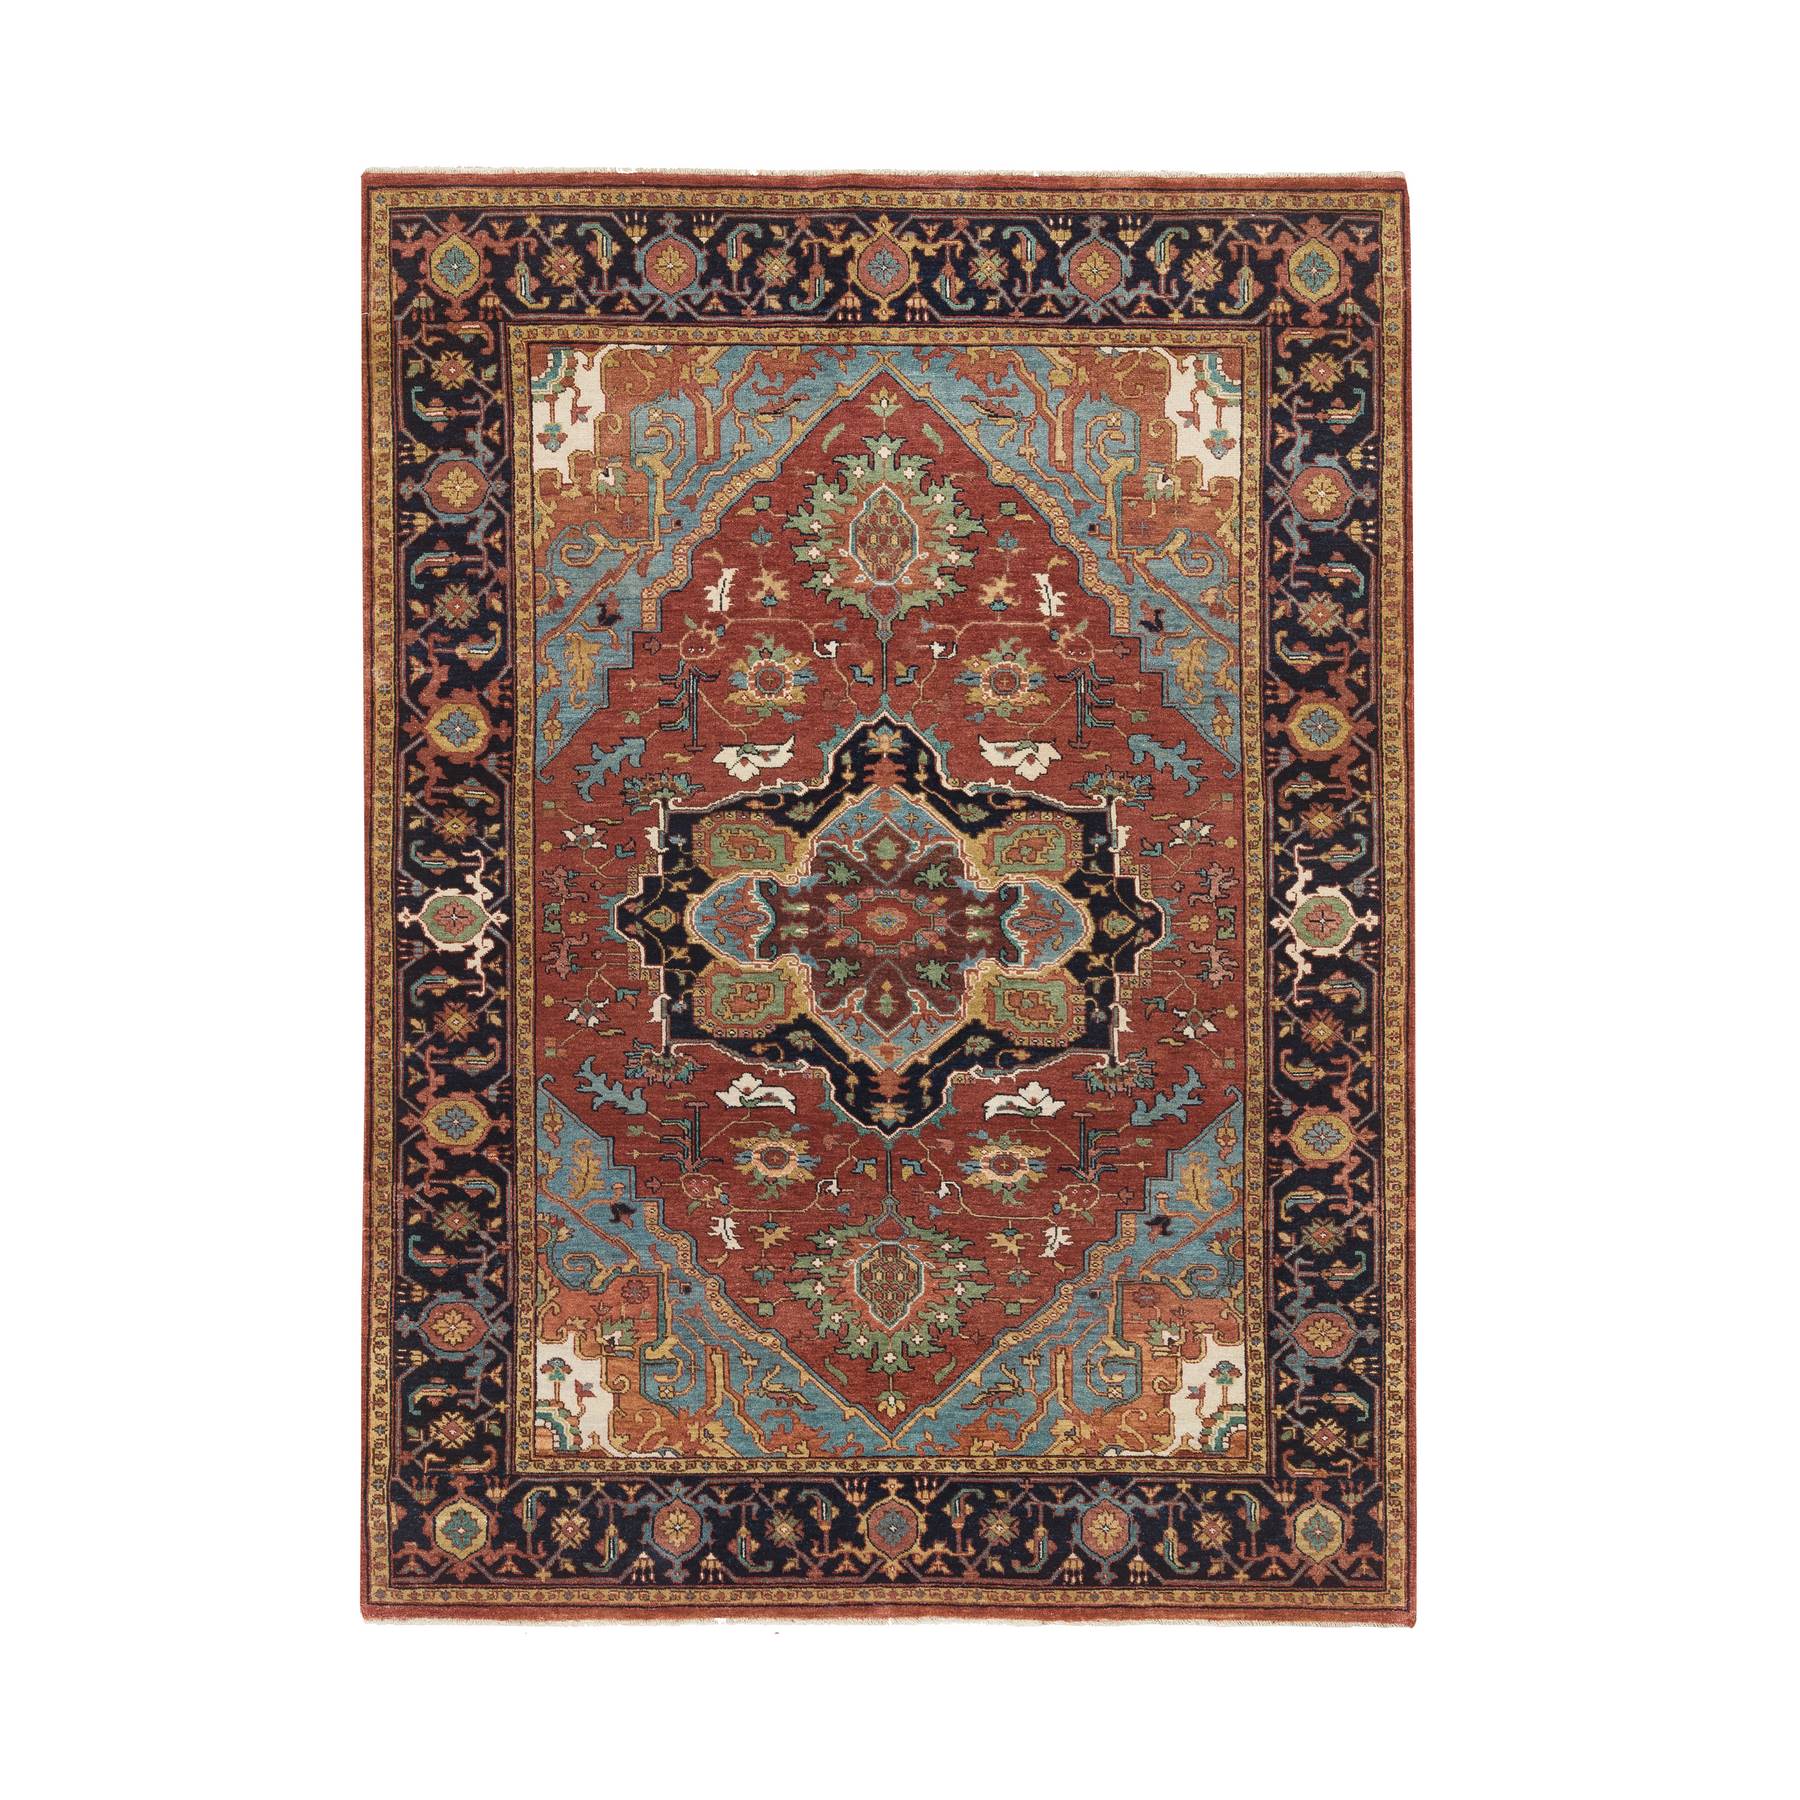  Wool Hand-Knotted Area Rug 5'2